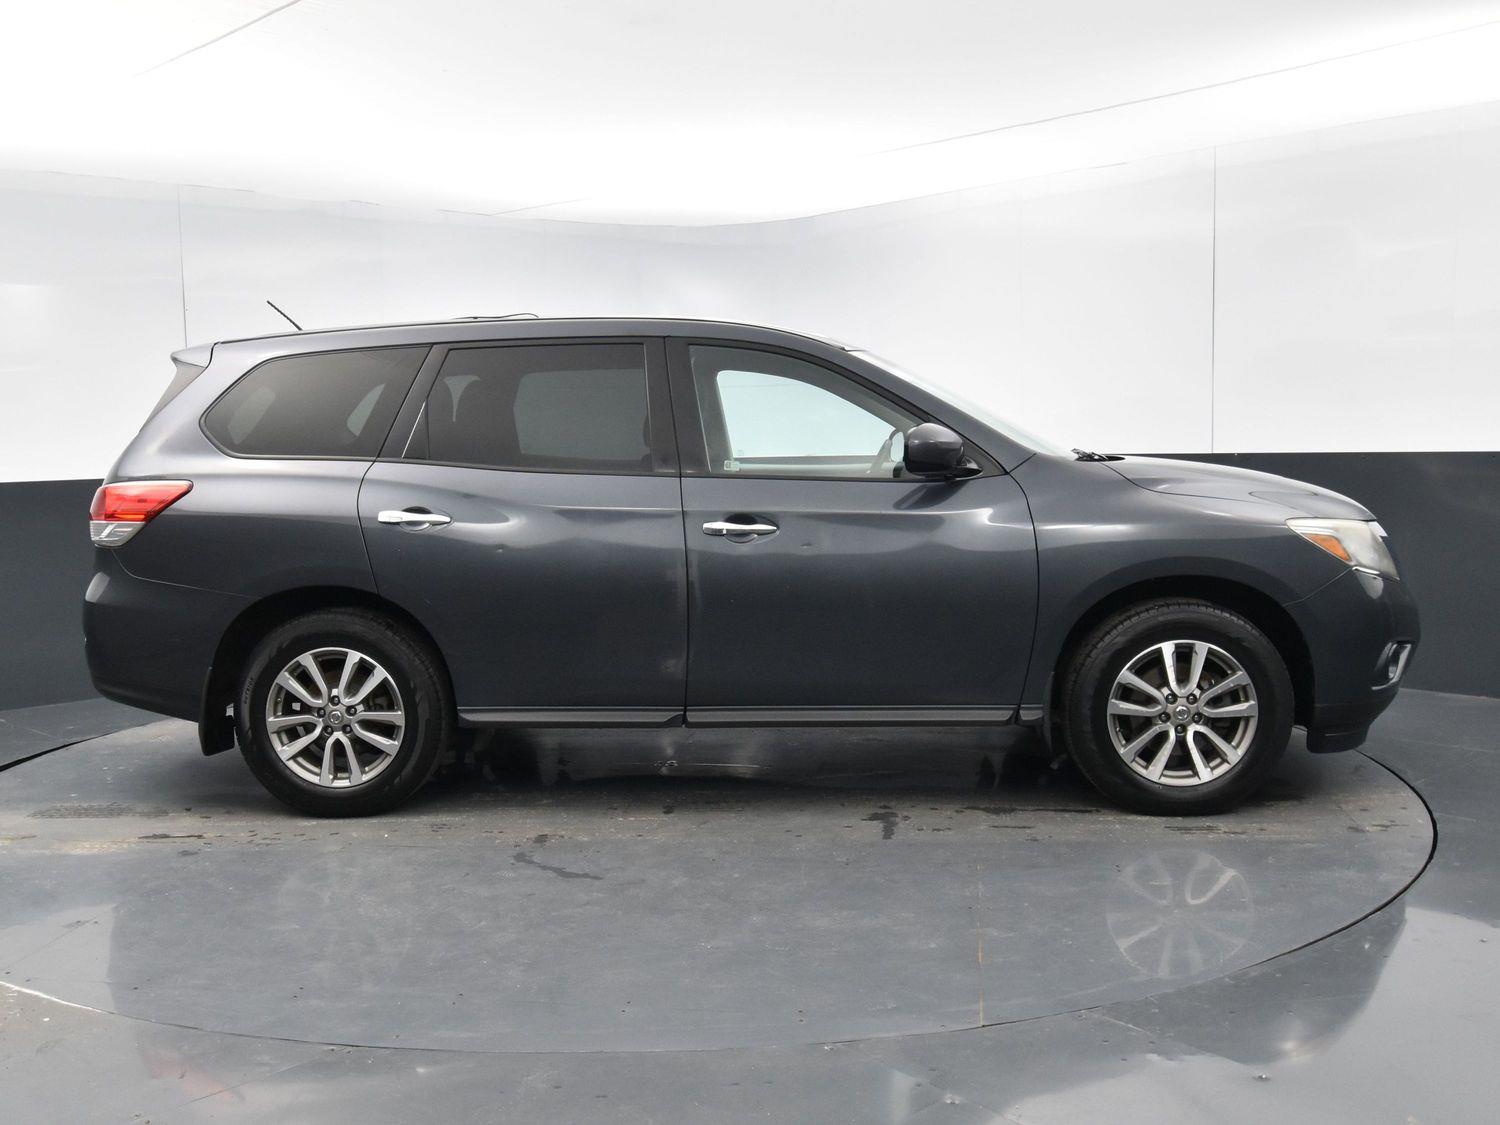 Used 2014 Nissan Pathfinder S Sport Utility for sale in Grand Island NE